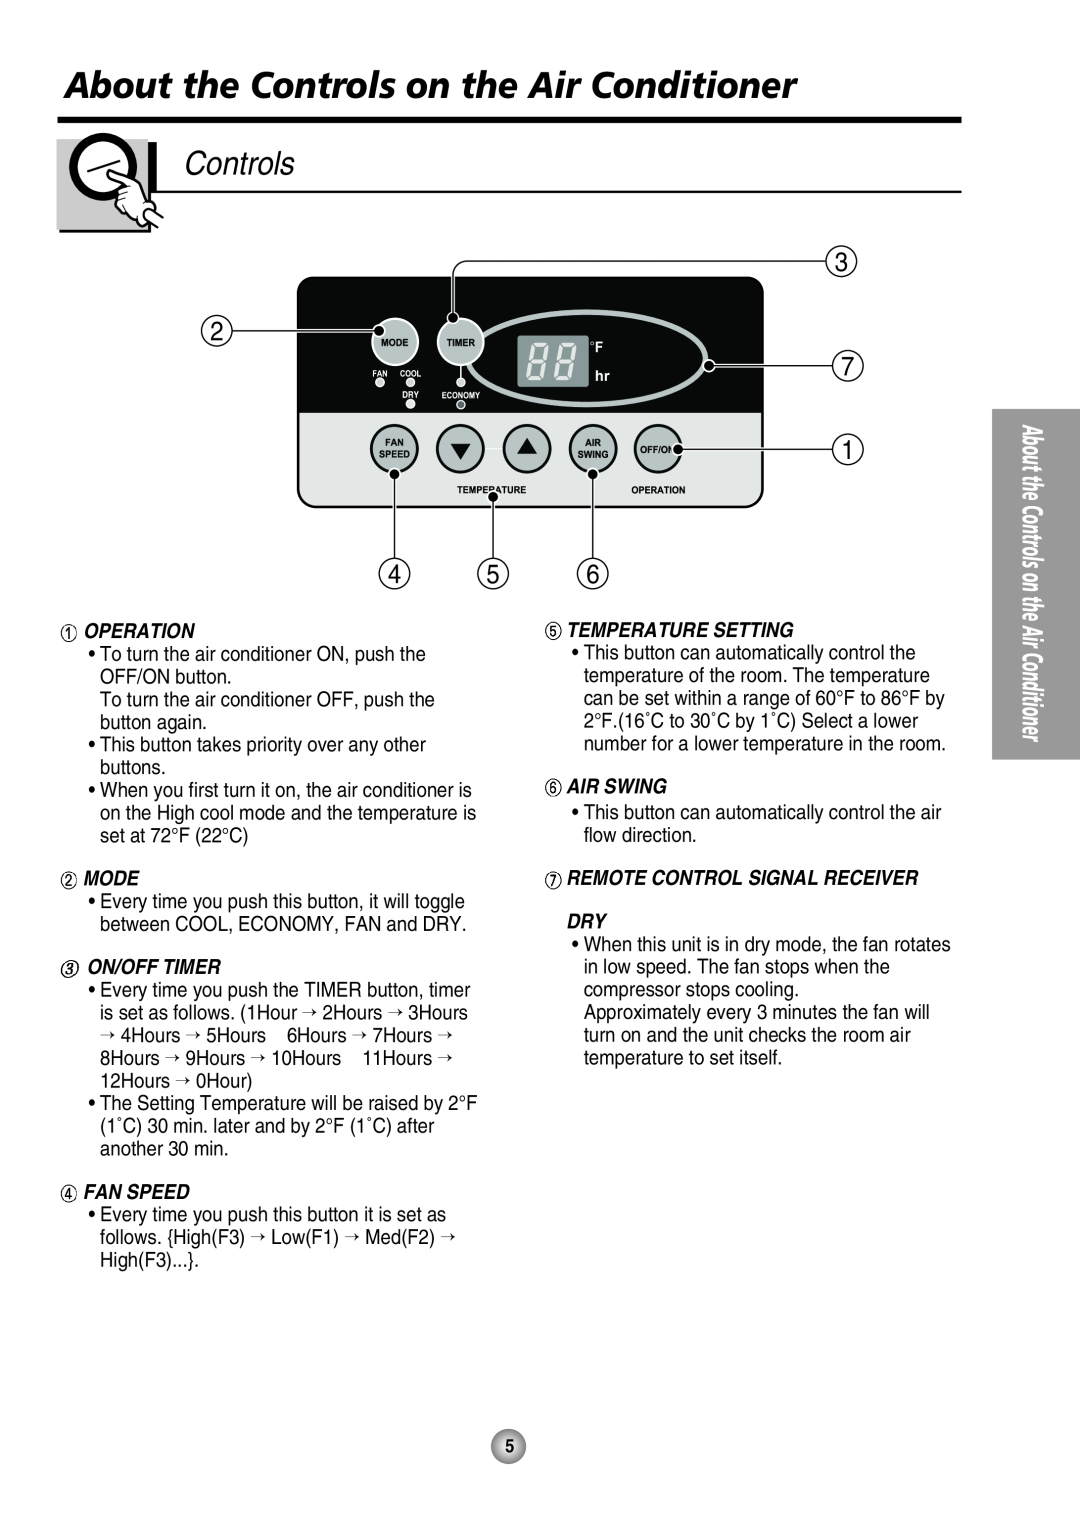 Panasonic CW-XC125HU About the Controls on the Air Conditioner, Operation, Mode, On/Off Timer, Fan Speed, Air Swing 